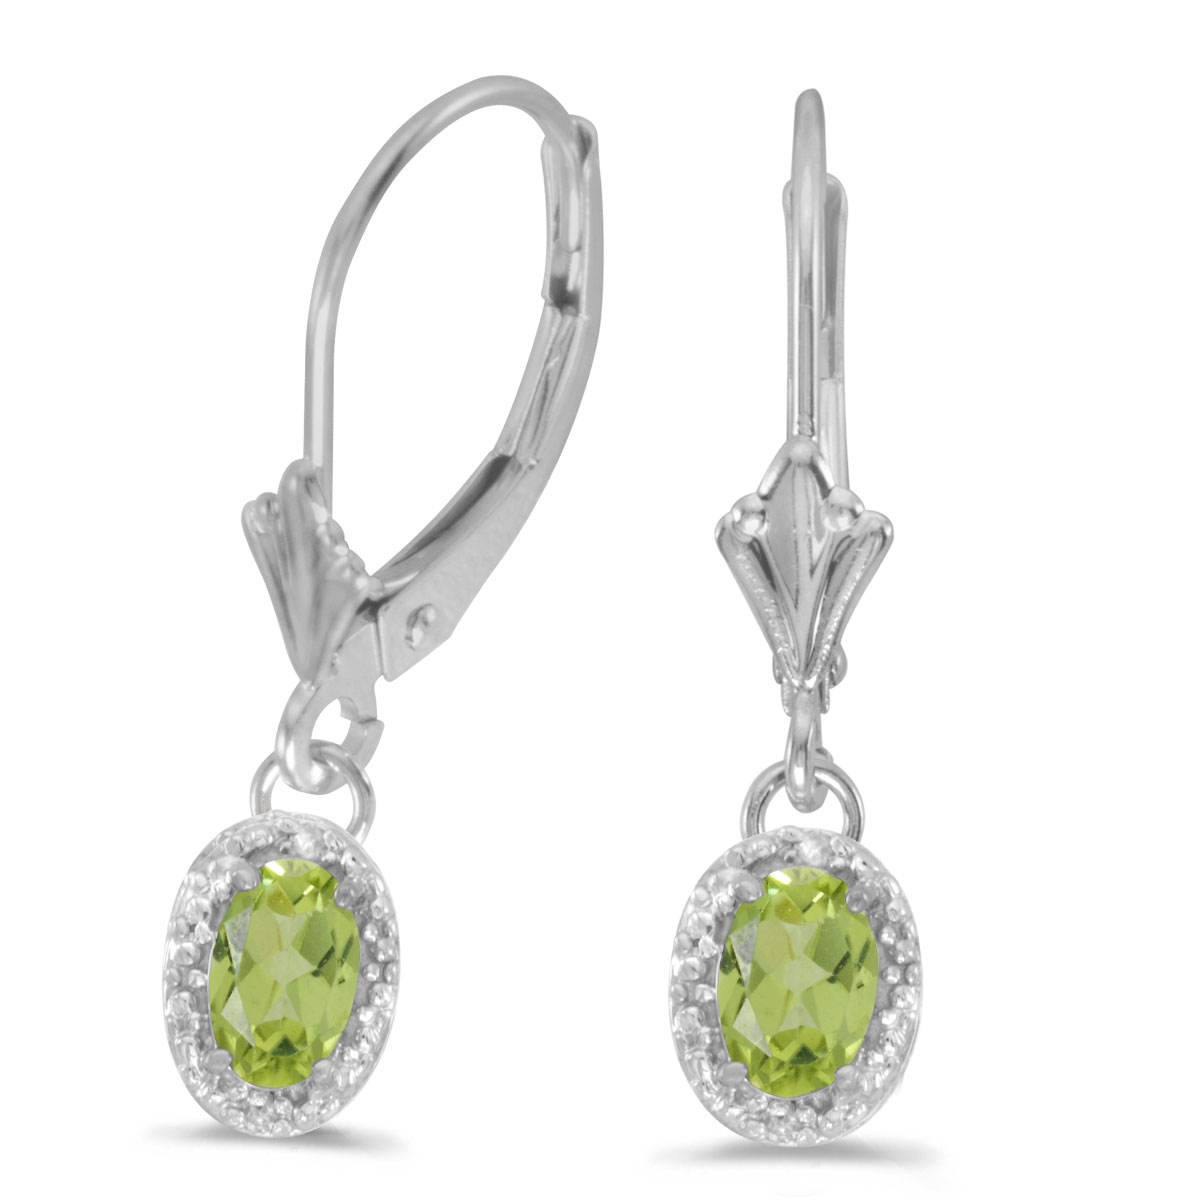 Beautiful 10k white gold leverback earrings with pretty 6x4 mm peridots complemented with bright ...